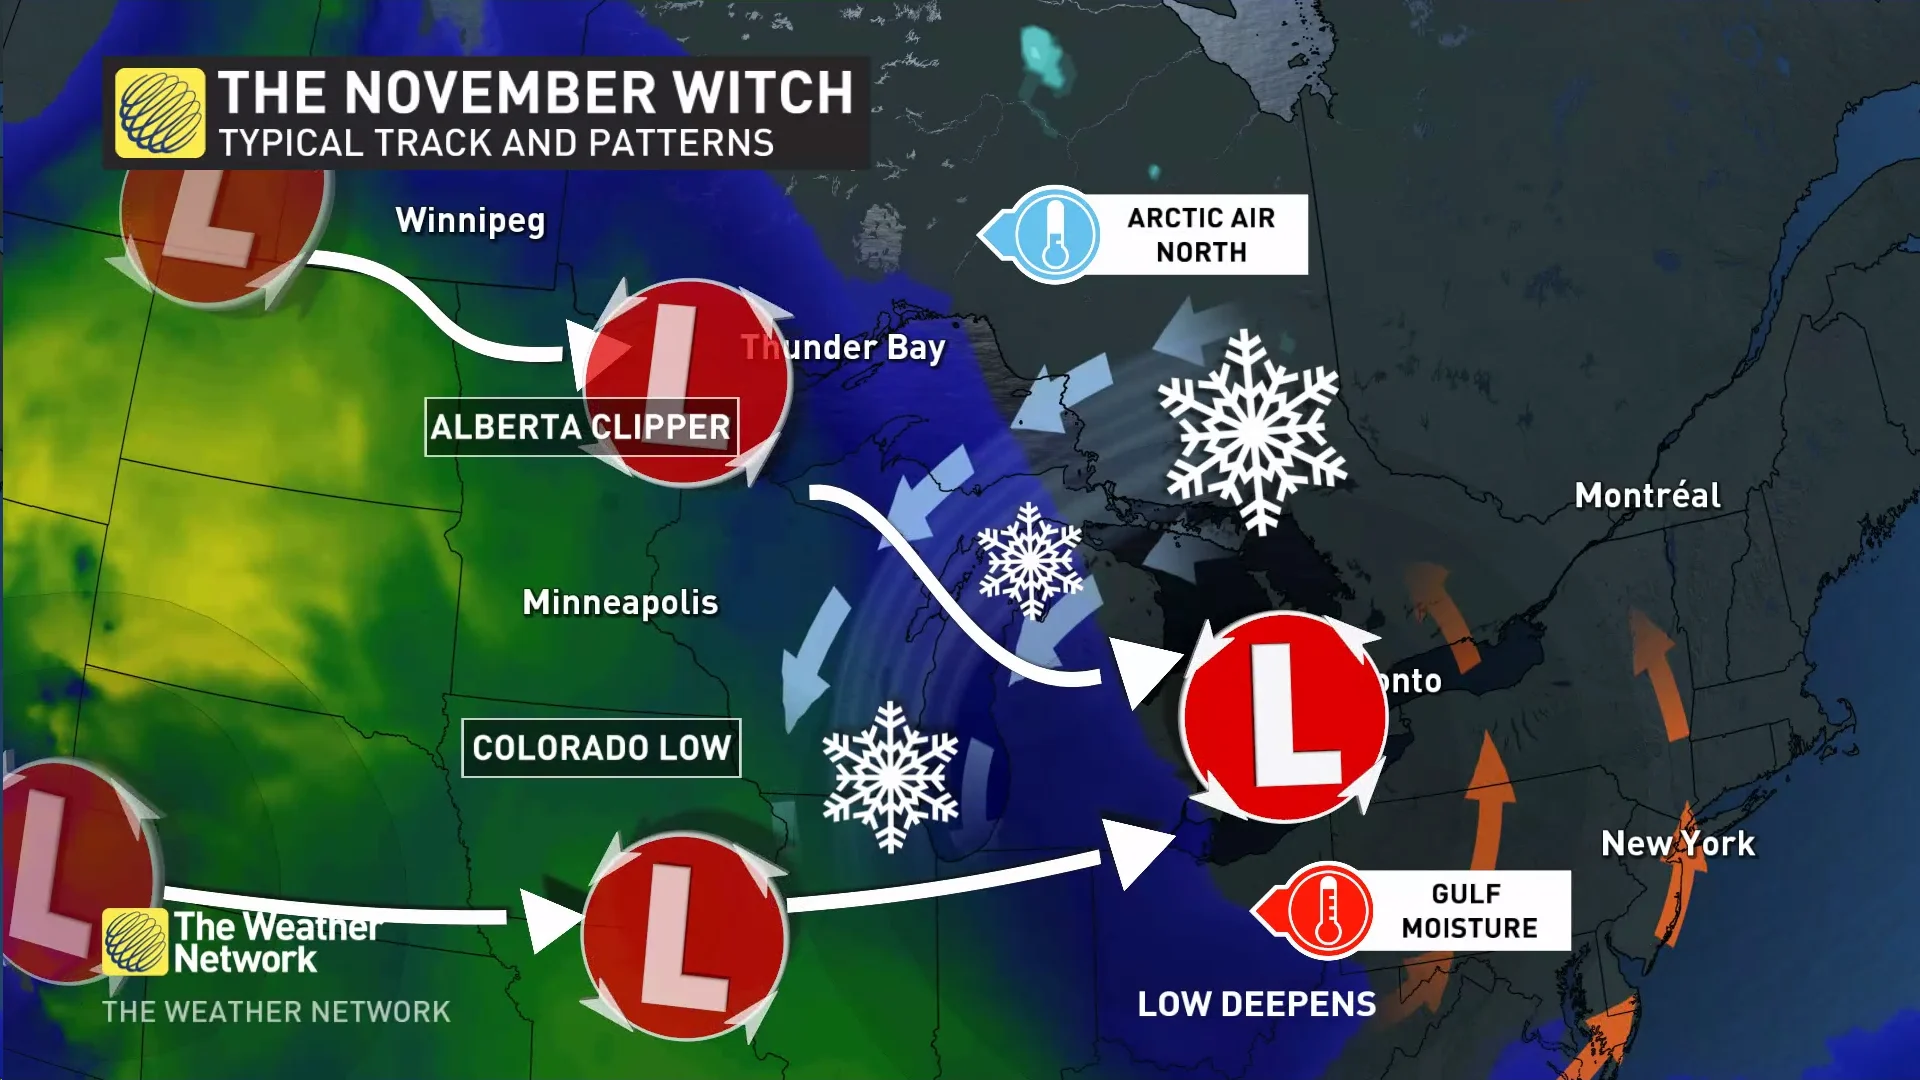 Explainer: Witch of November typical weather pattern (The Weather Network)